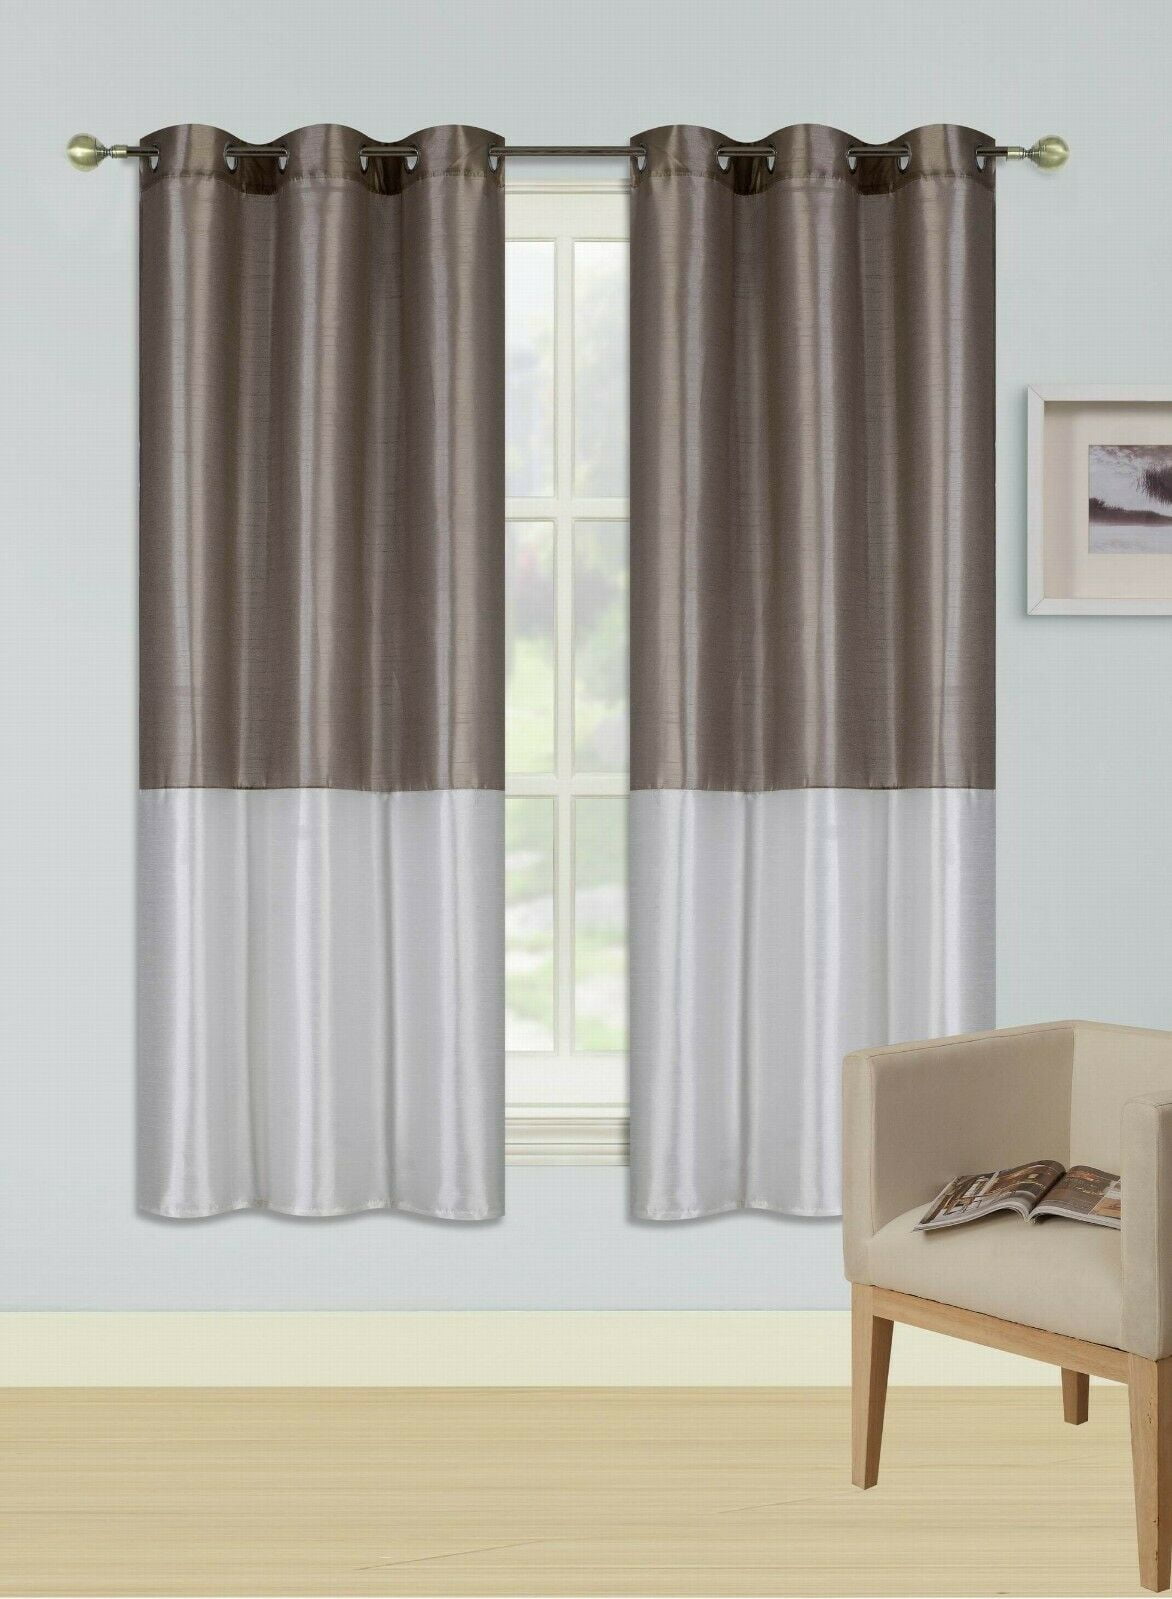 EID IVORY TAUPE Insulated Lined Blackout Grommet Window Curtain Panel PAIR 